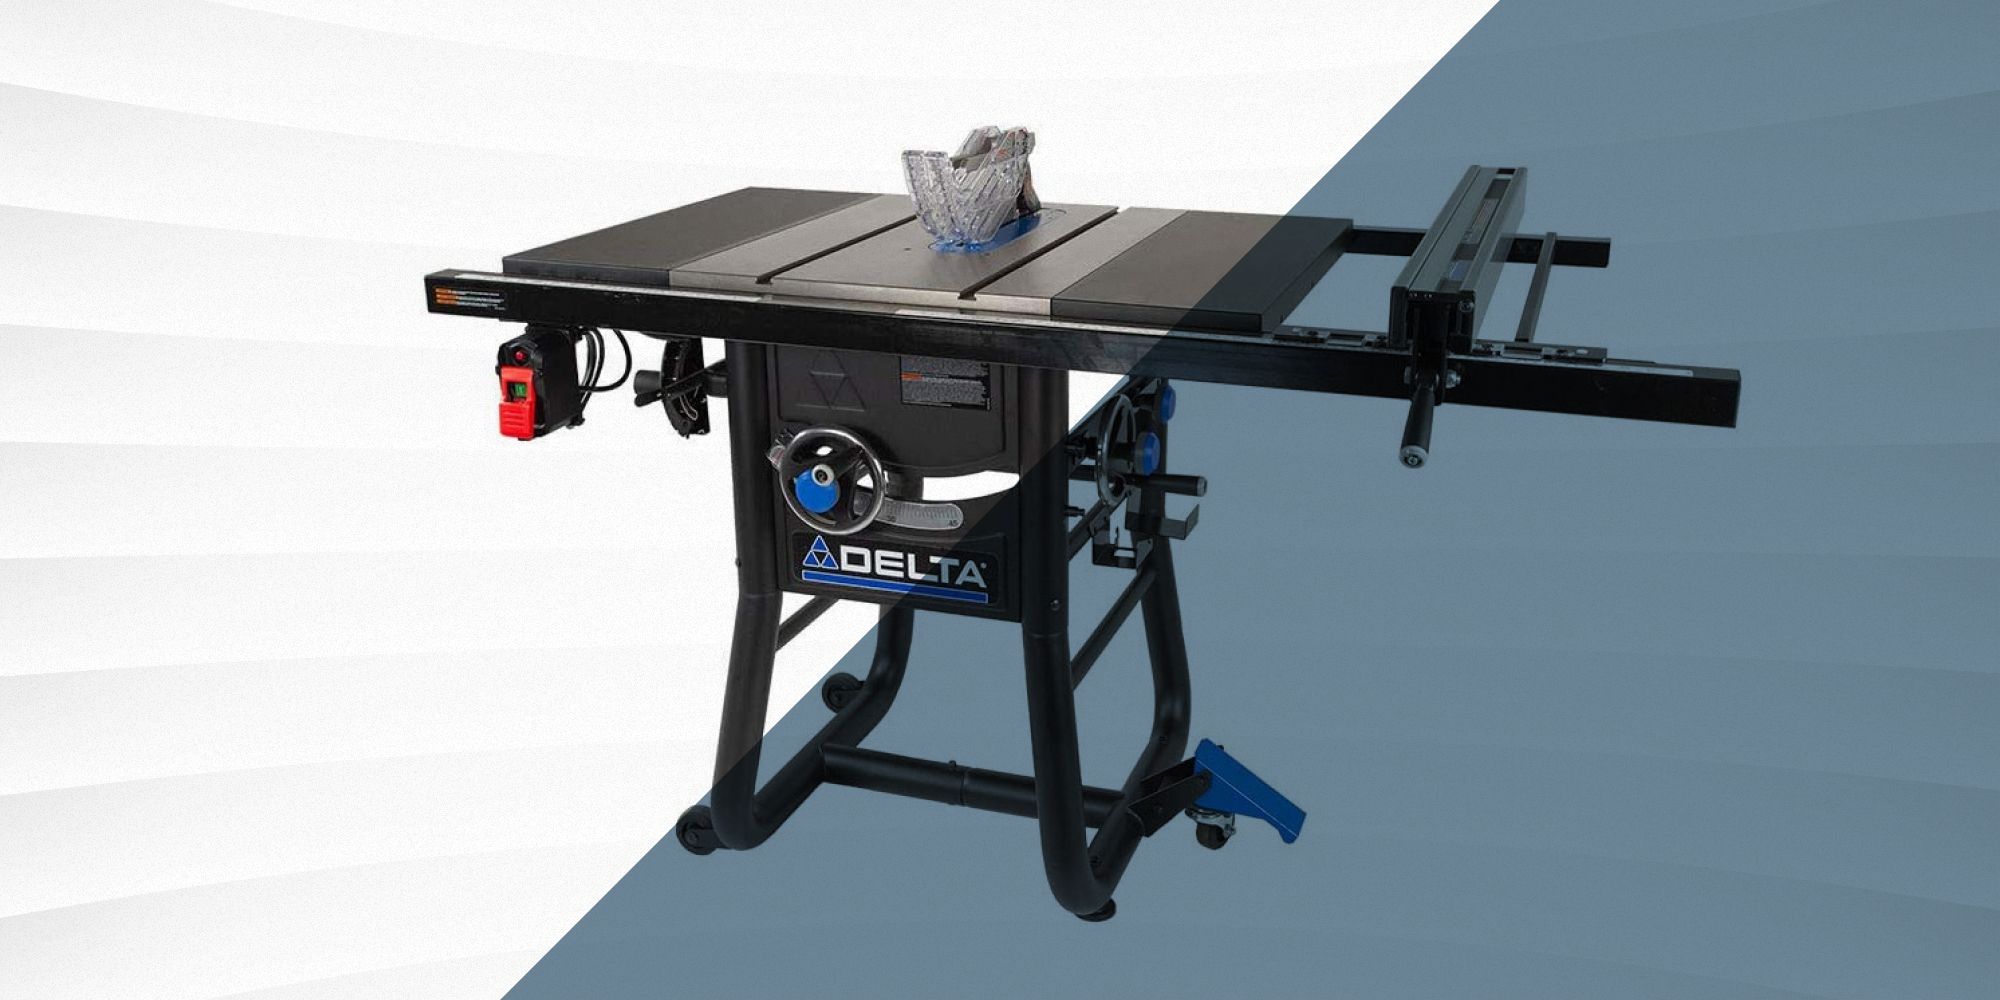 why are table saws so expensive?